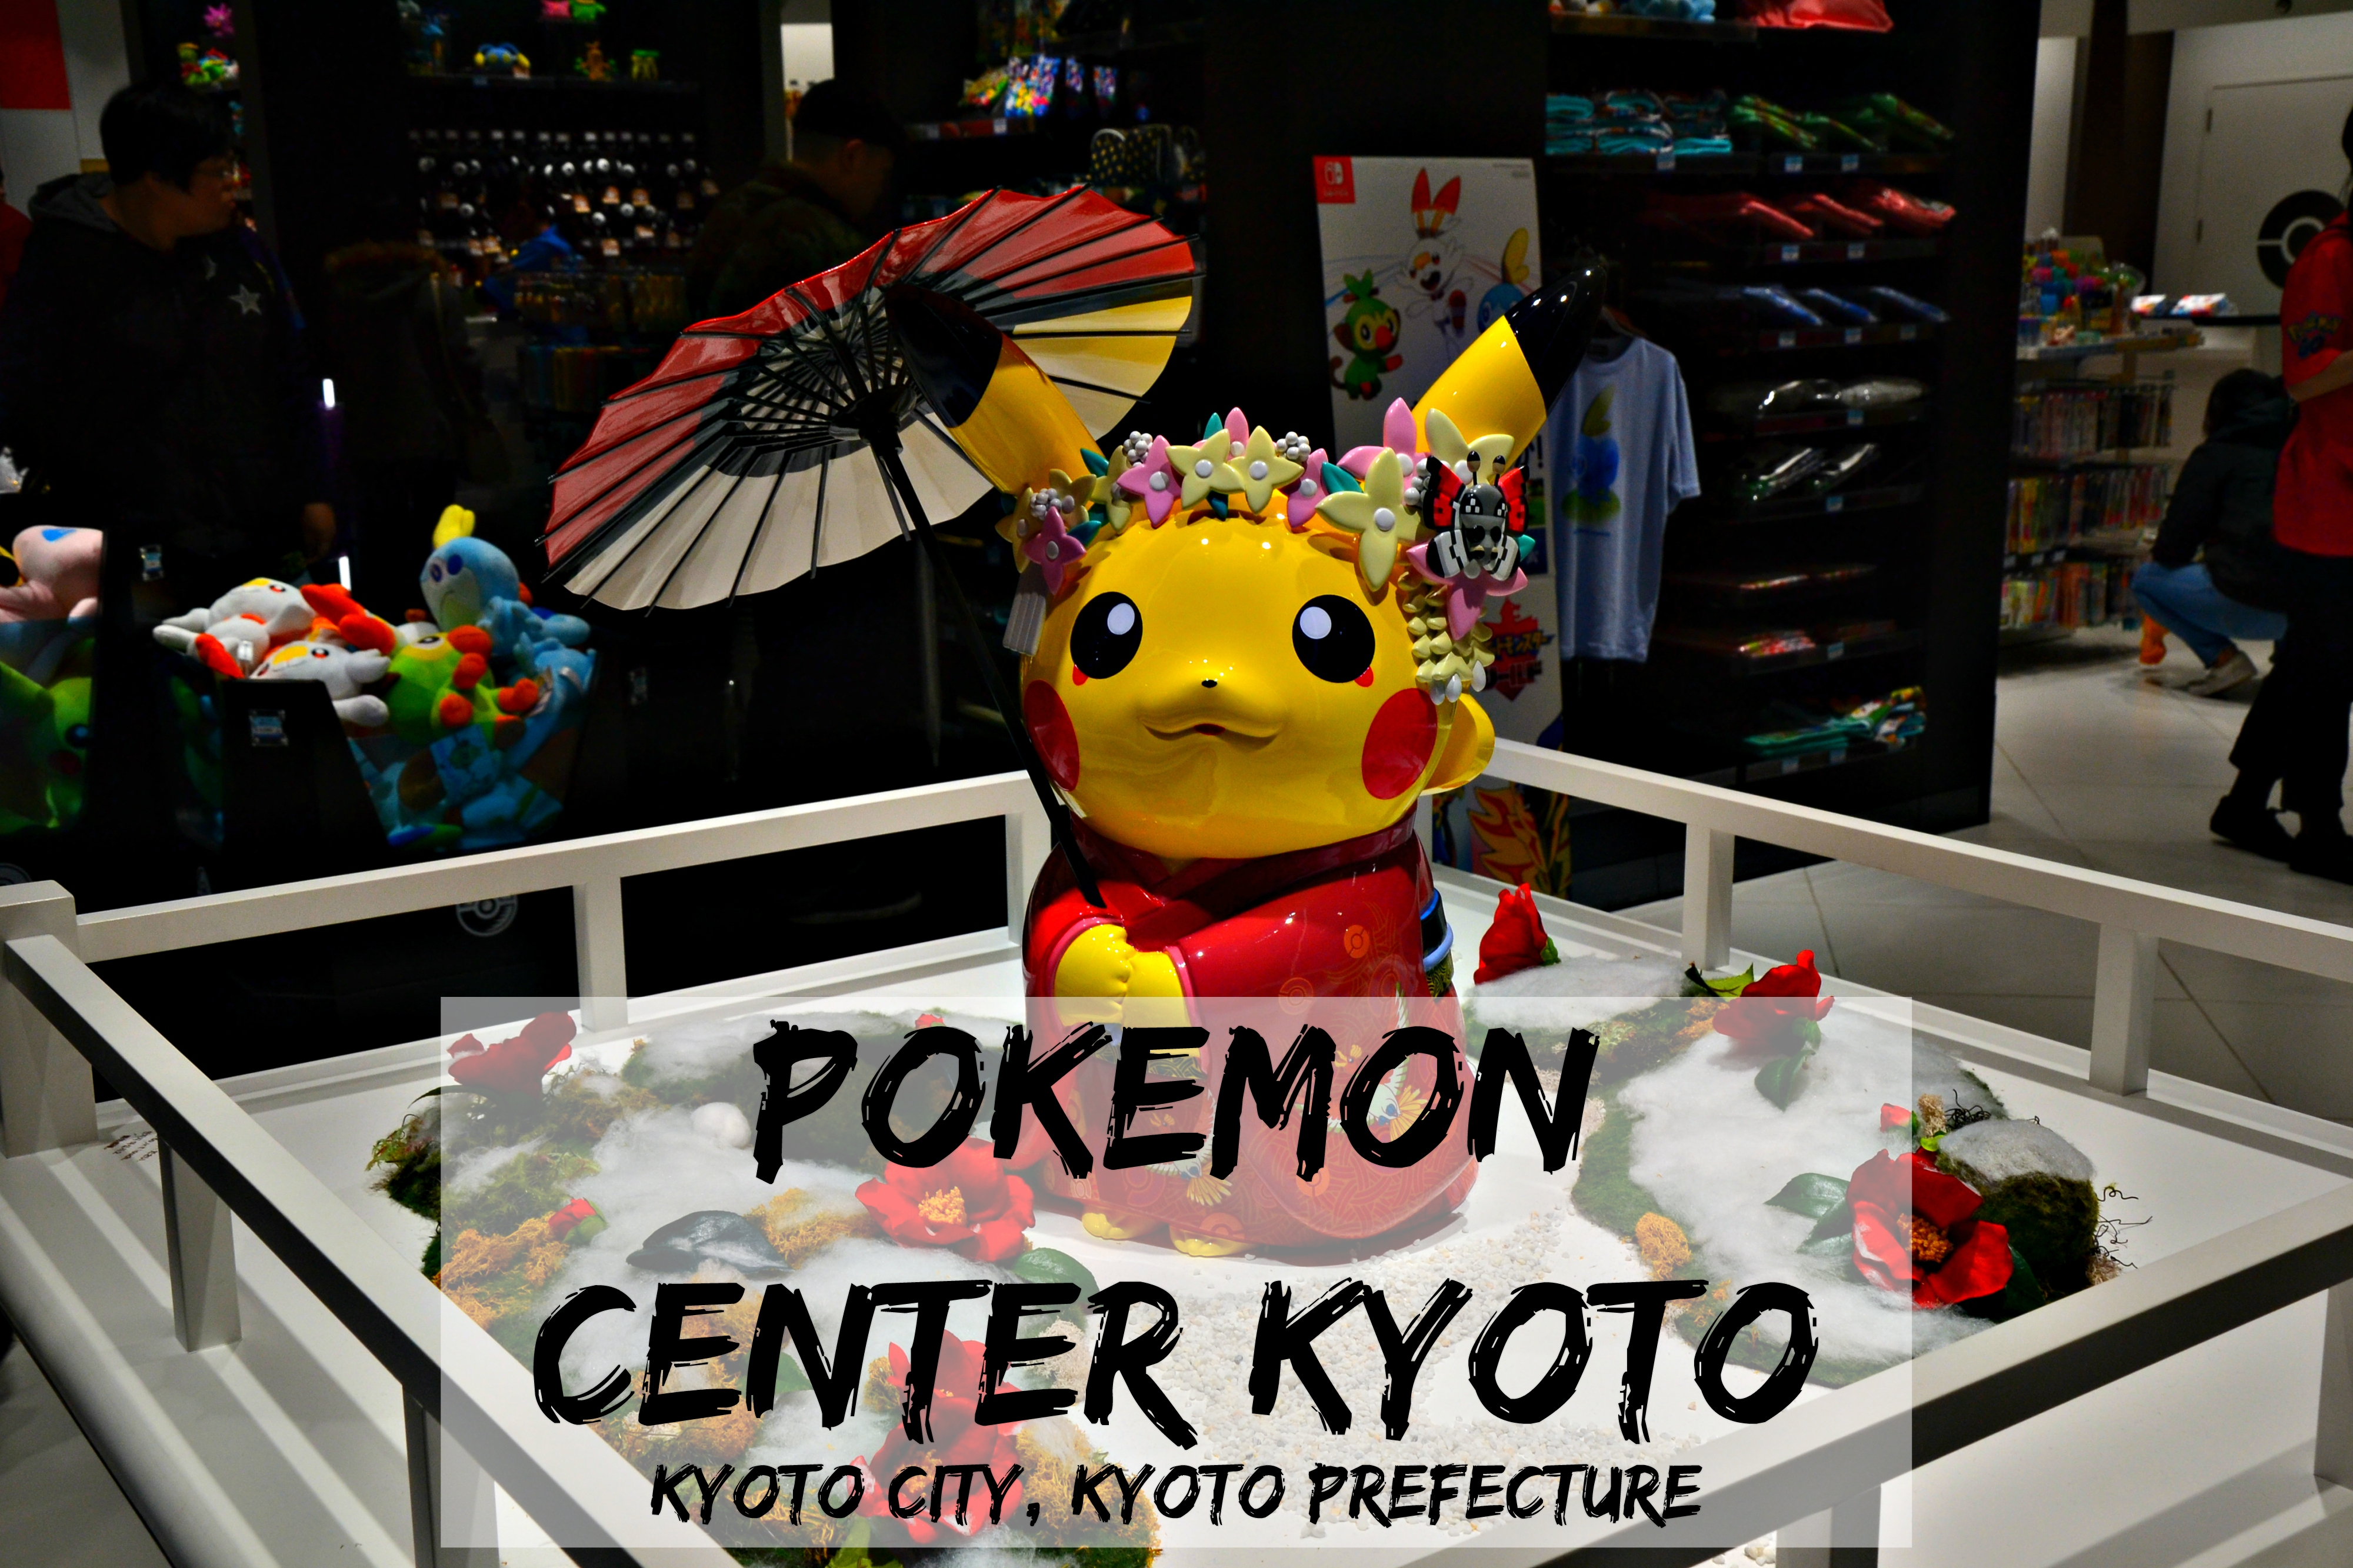 PokéJungle: Pokémon Game & Merch News on X: Pokémon Center Kyoto will be  moving and opening at their new location on March 16! Features statues of  Ho-oh and Lugia in the store.